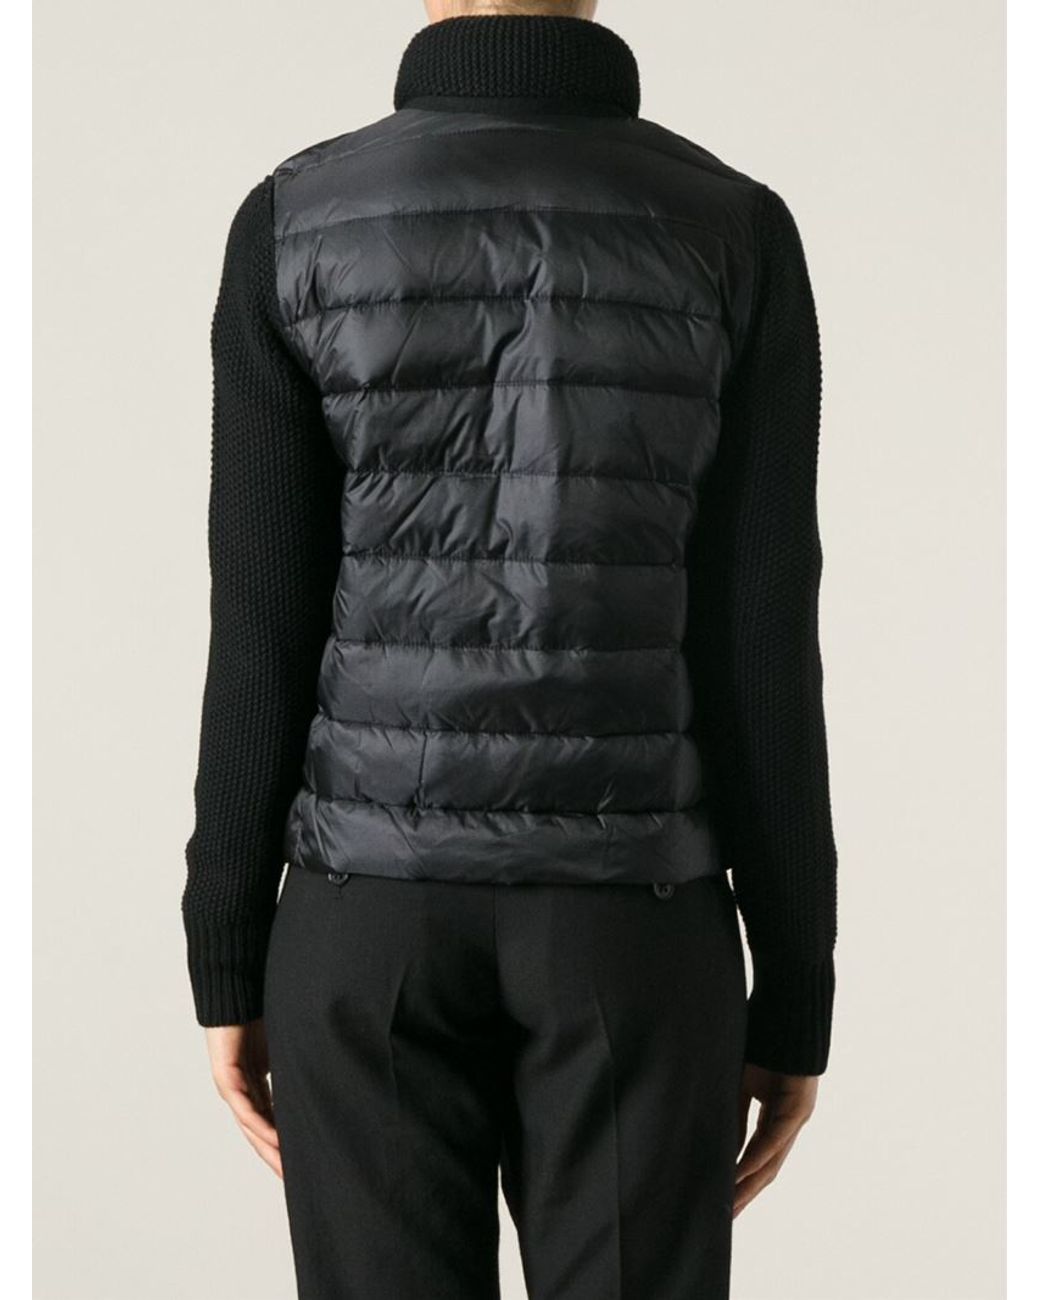 Moncler Padded Cardigan in Black | Lyst